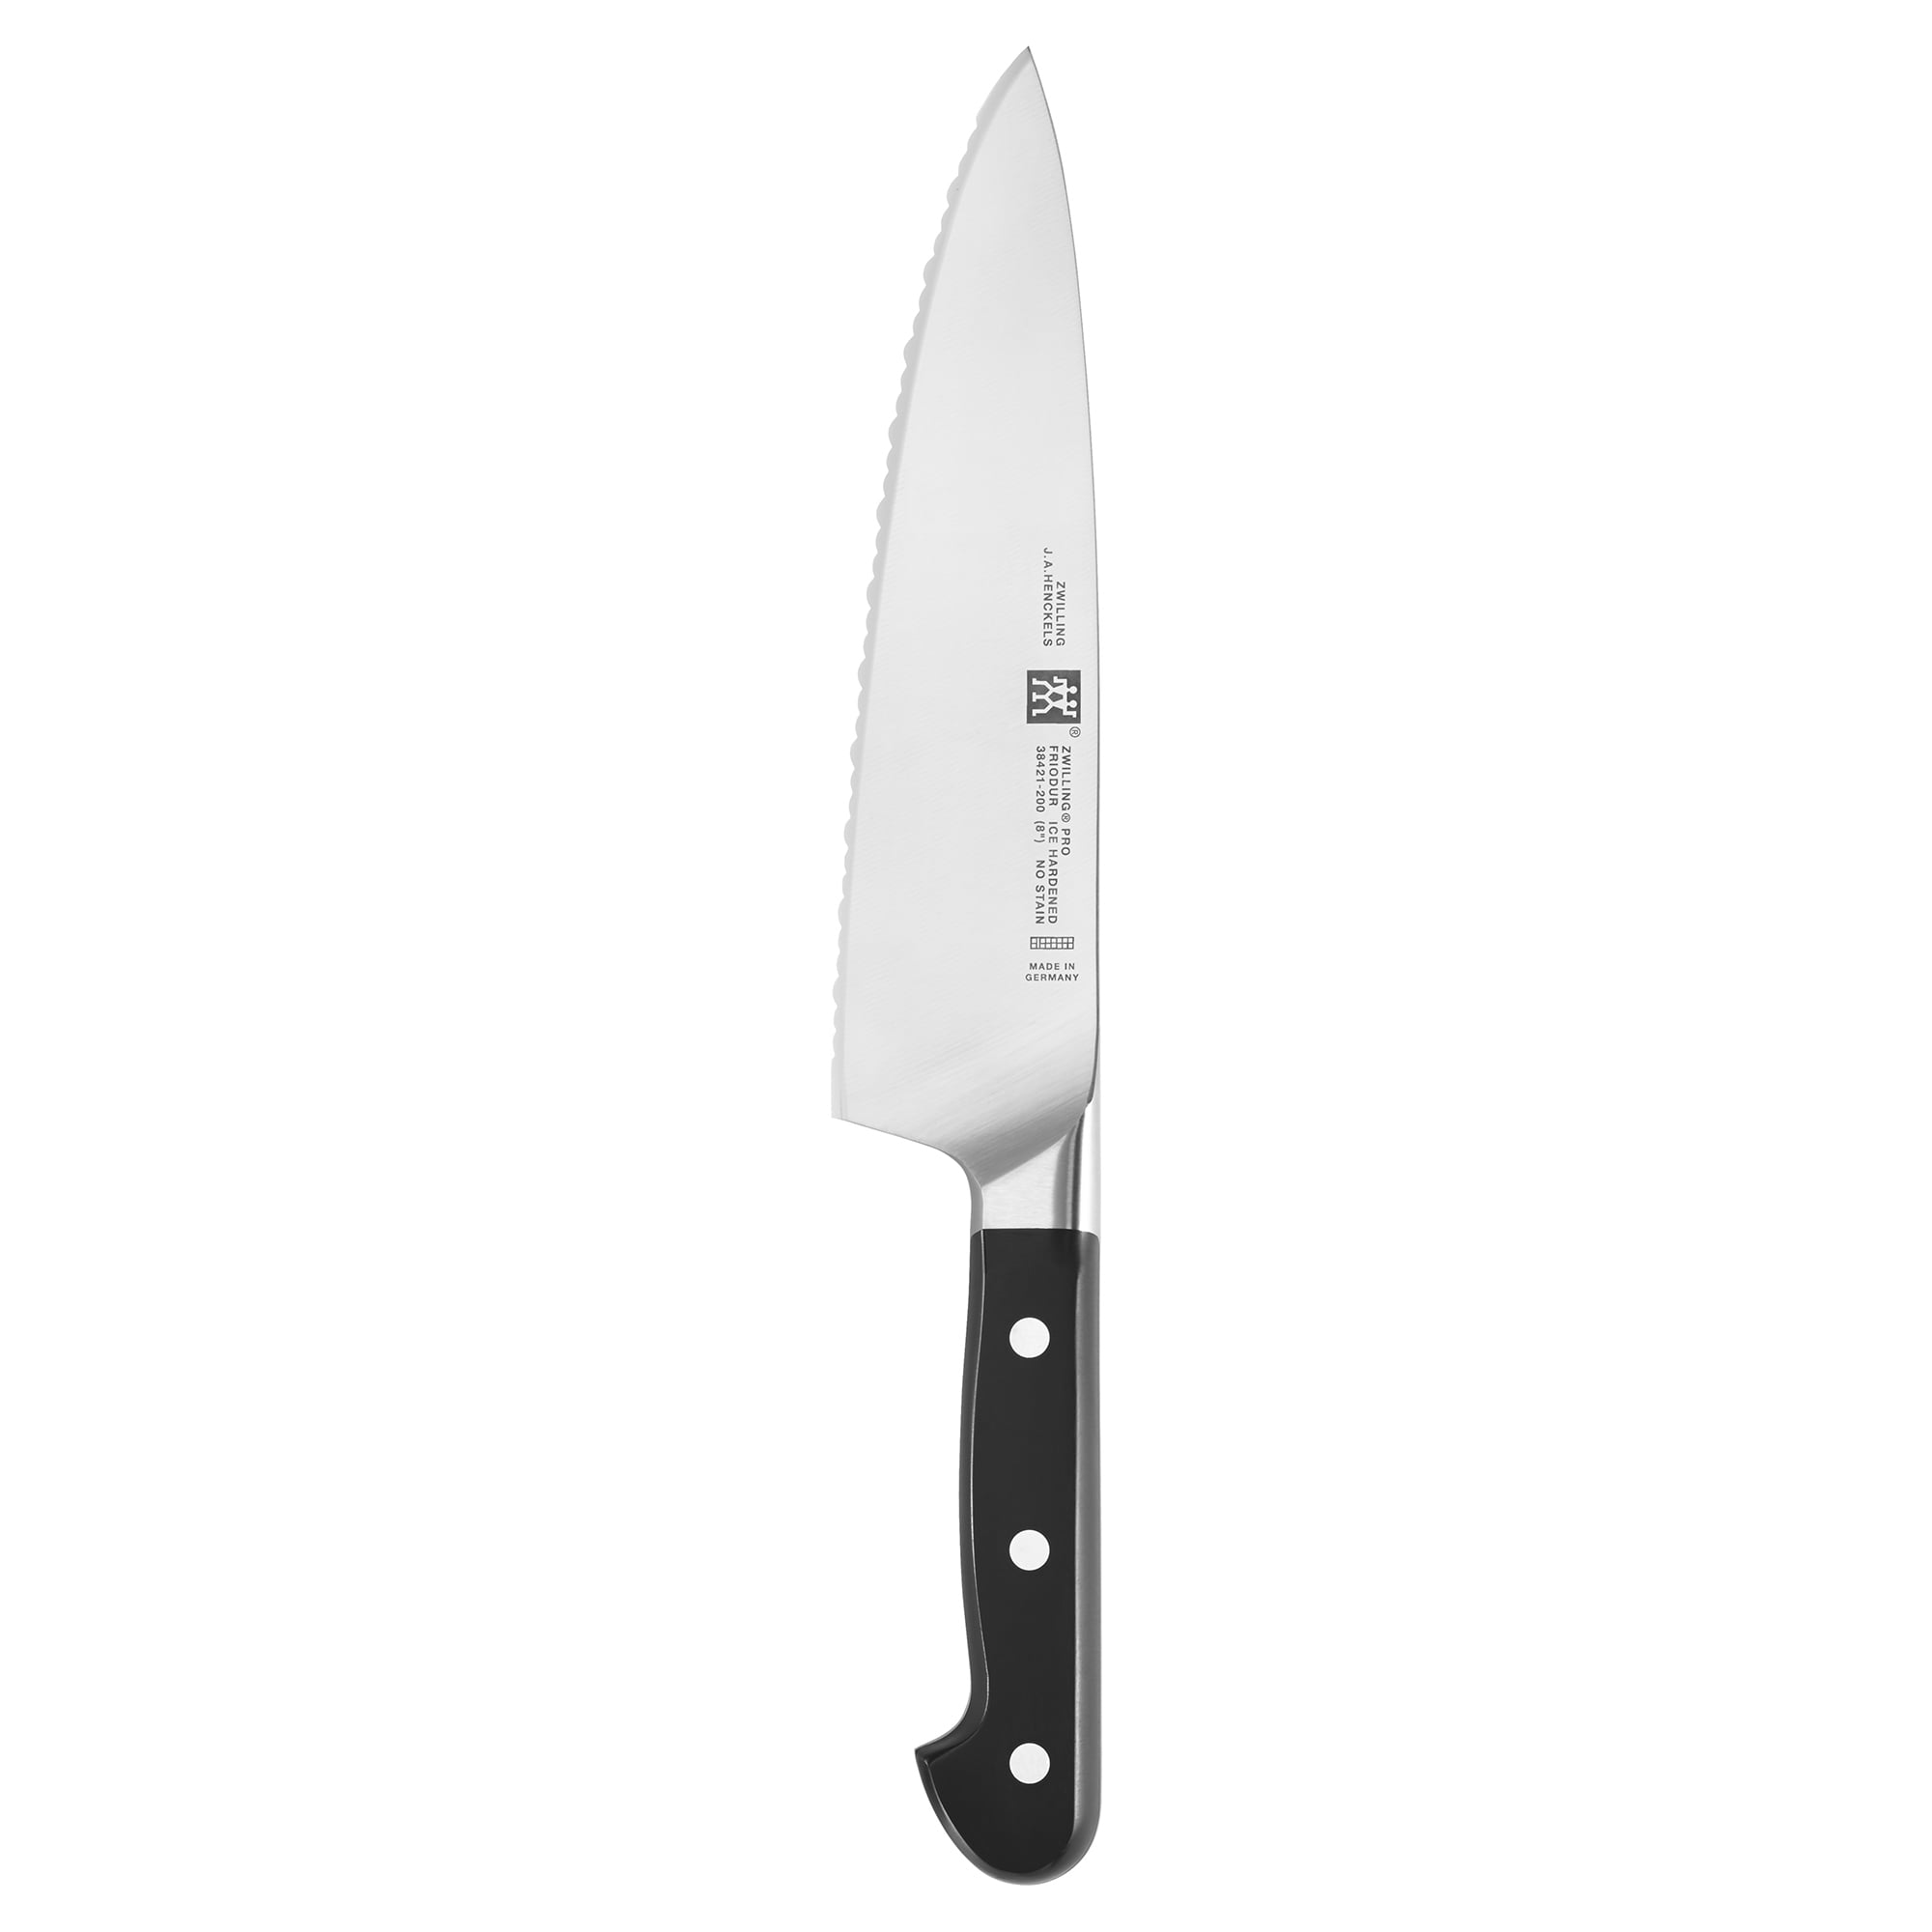  STEWART & BRADLEY 8Inch Chef Knife. MasterPro Series Full Tang,  Razor Sharp, Ultra Fine Highly Tempered German Steel 4028, Forged to 1400  degrees, Precision Diamond Sharpened Chefs knife 8 inch 